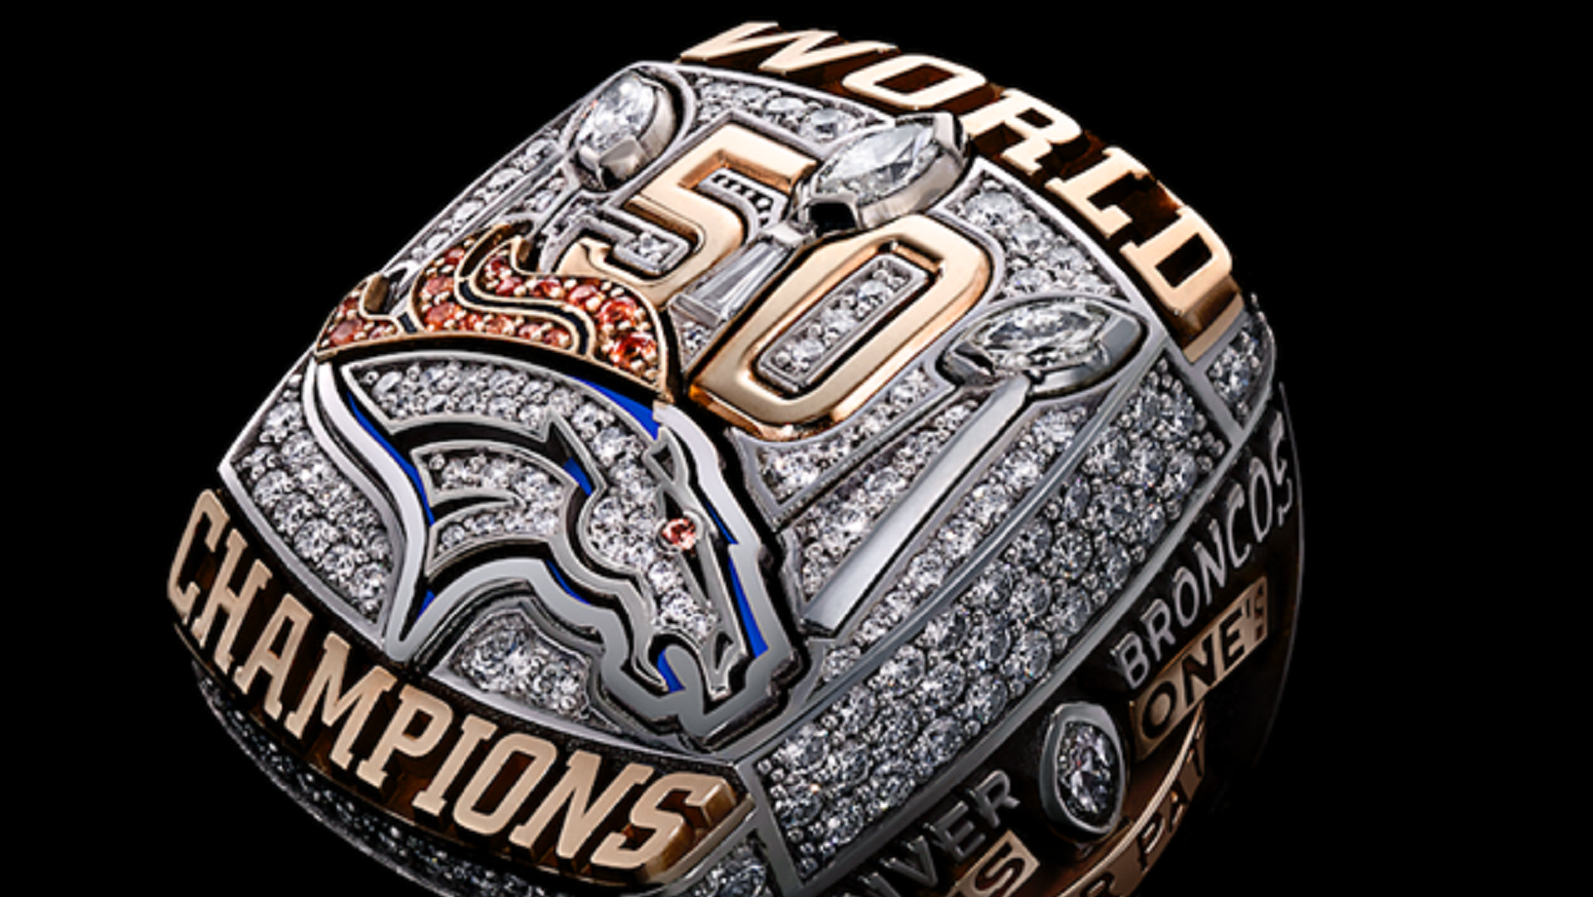 50 pictures of 50 Super Bowl rings, in 